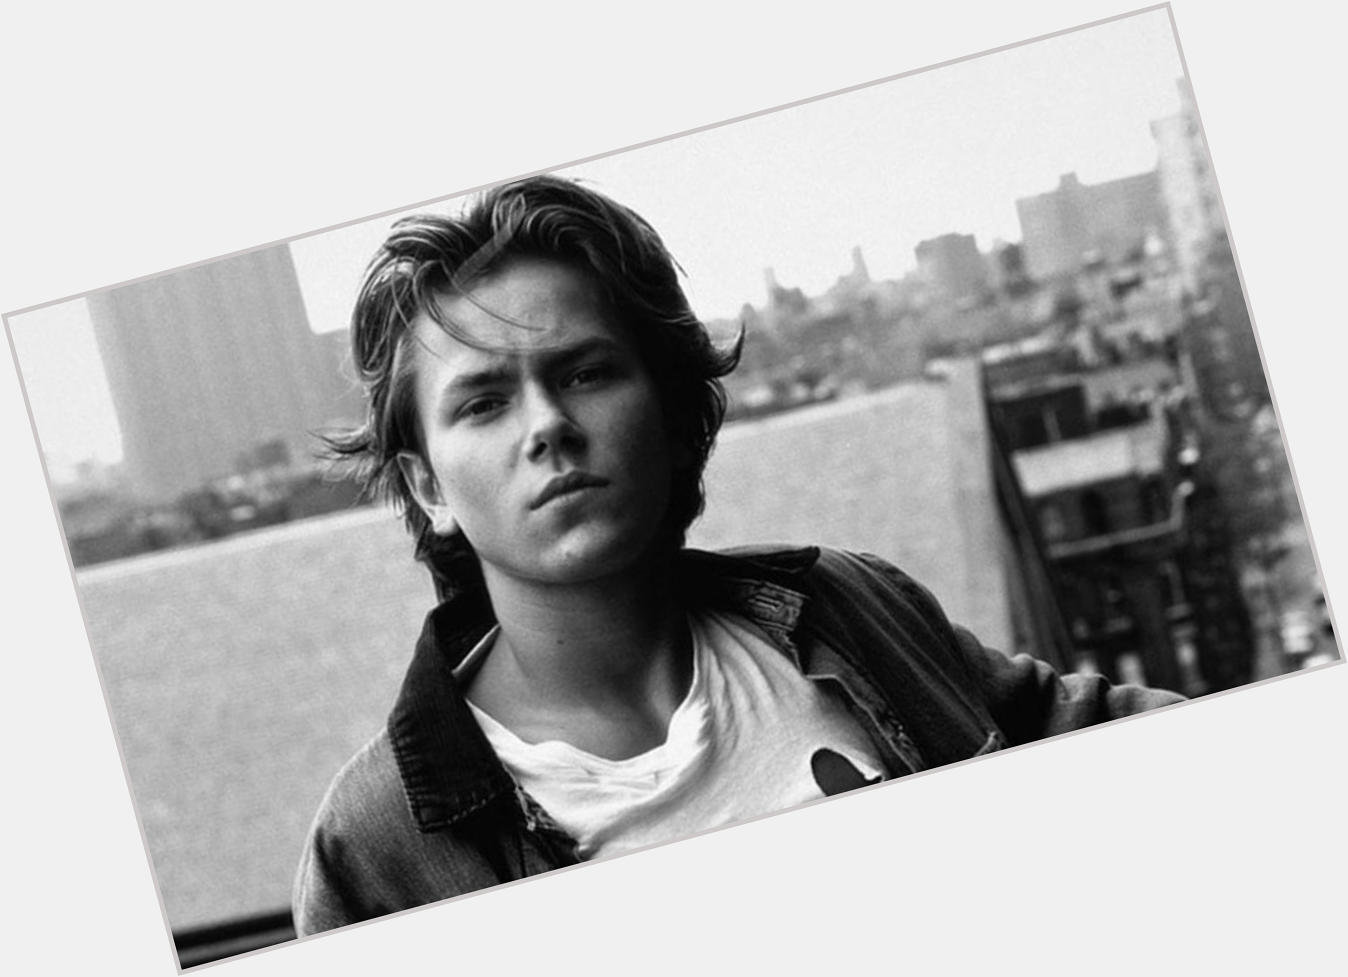 Happy birthday to River Phoenix! He would have turned 45 today. 